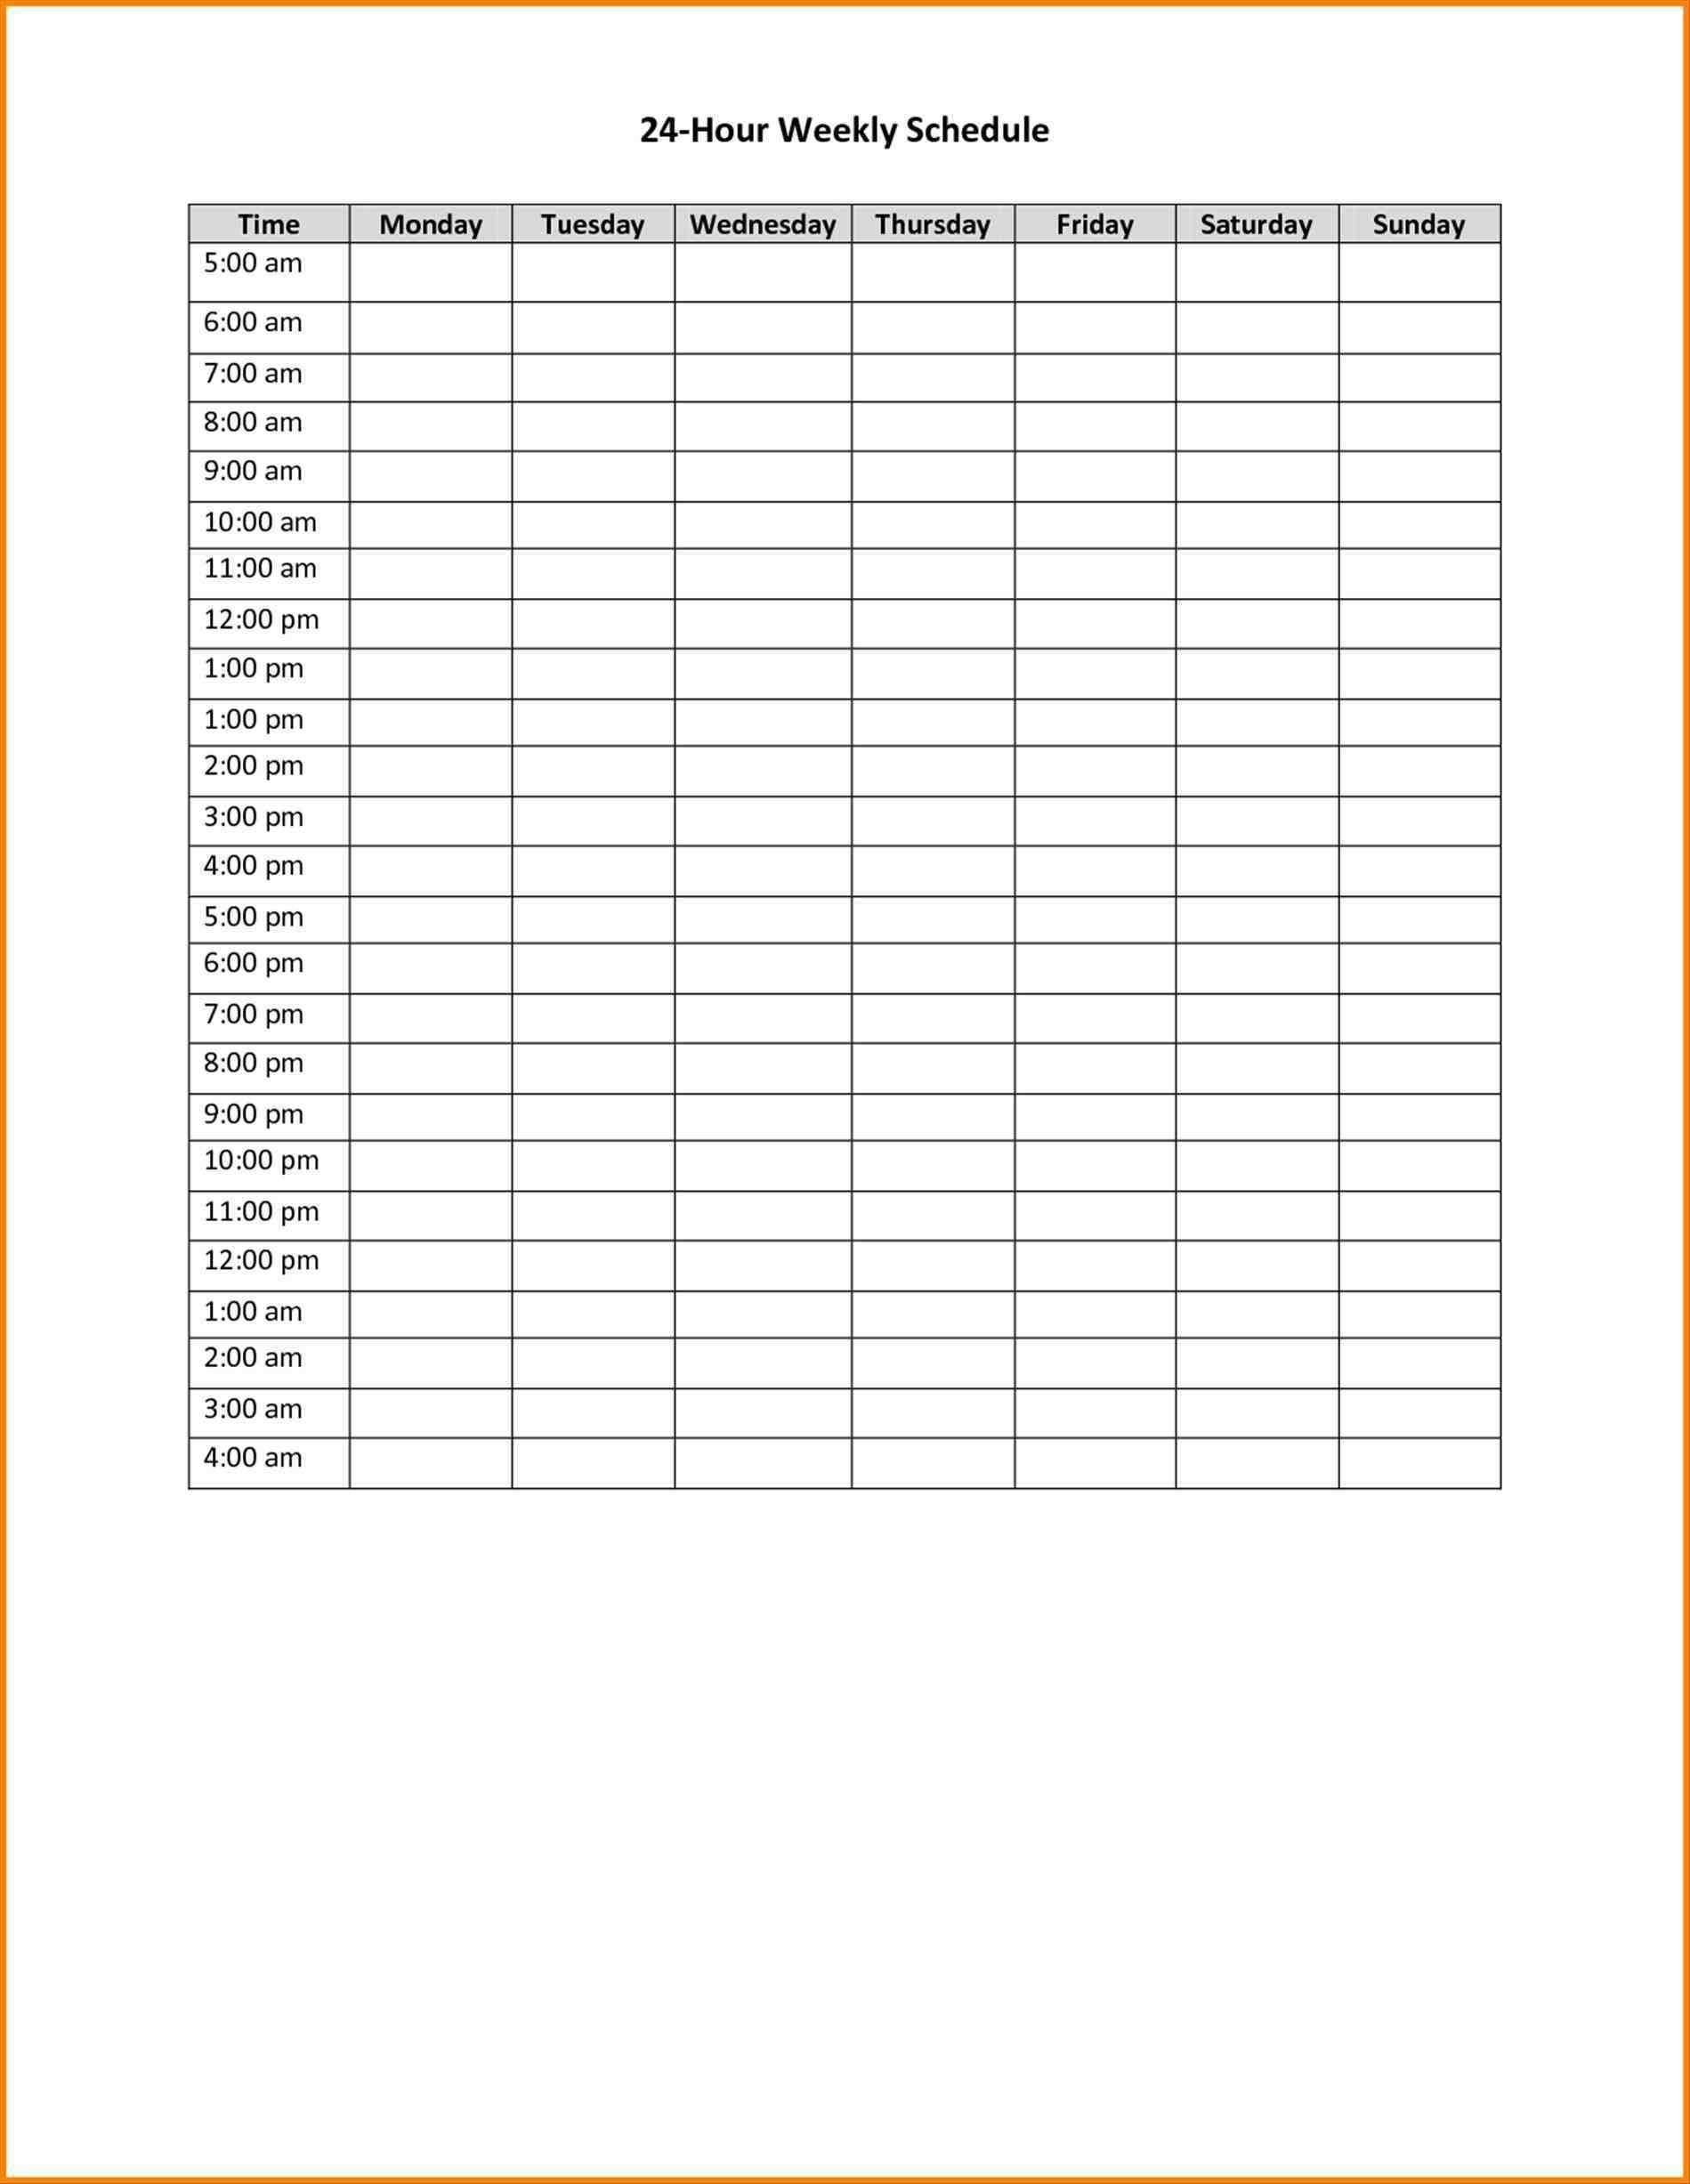 Collect Week Calendar Blank With Time Slots ⋆ The Best